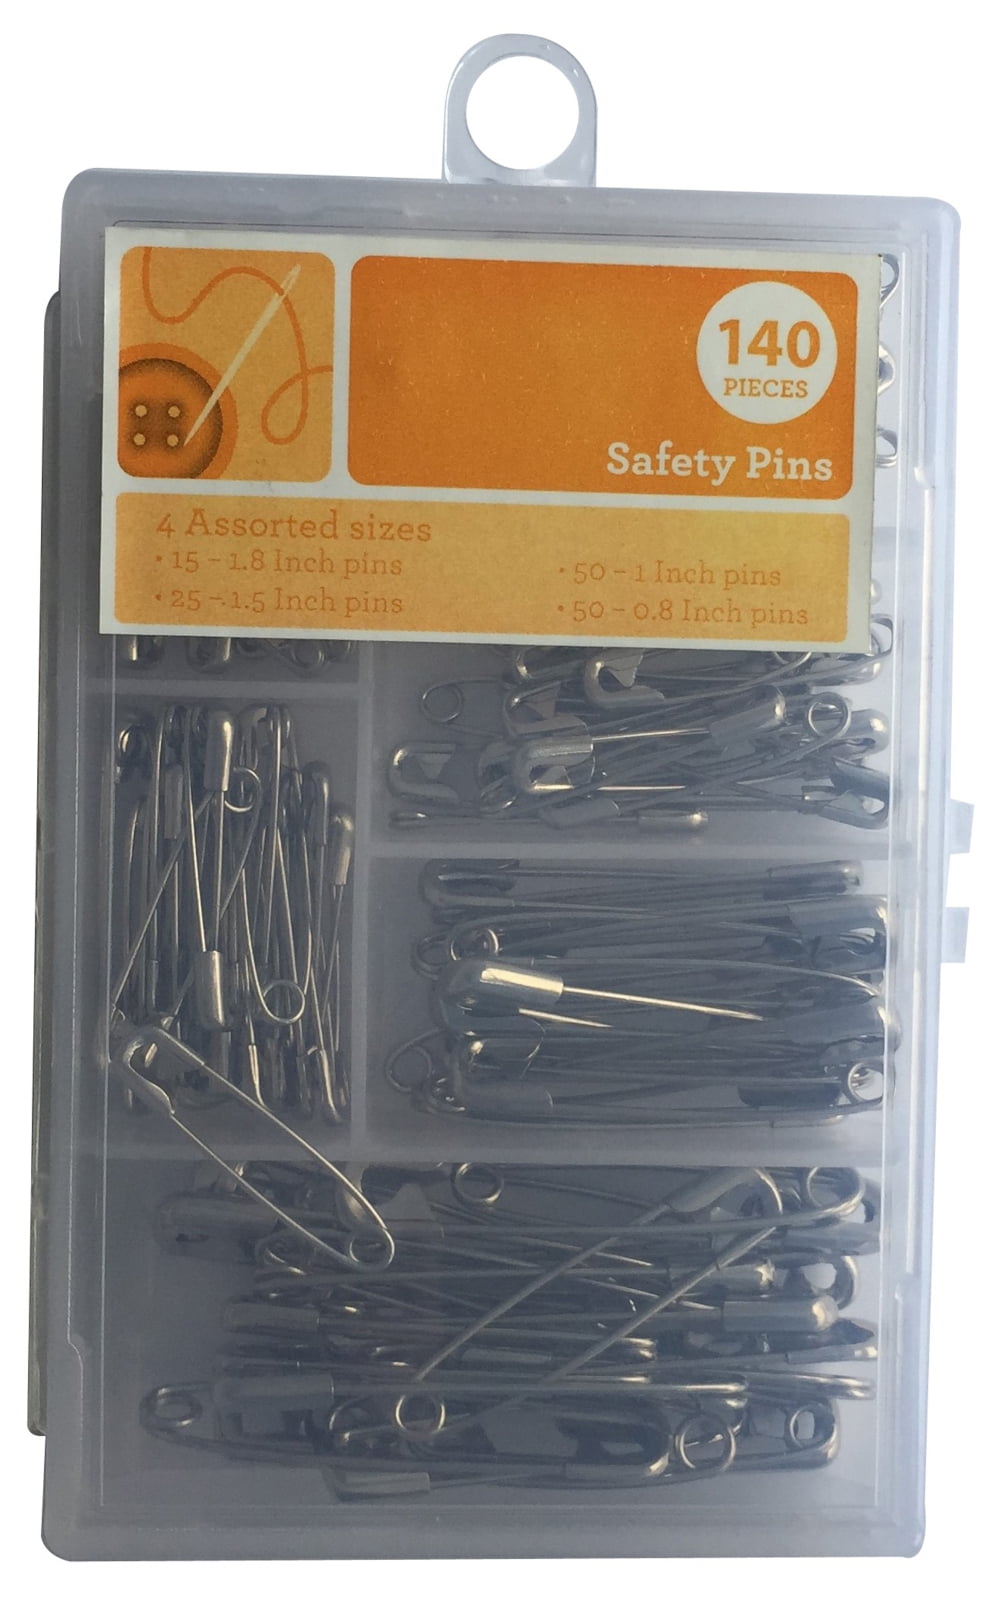 Safety Pins - ACME Display